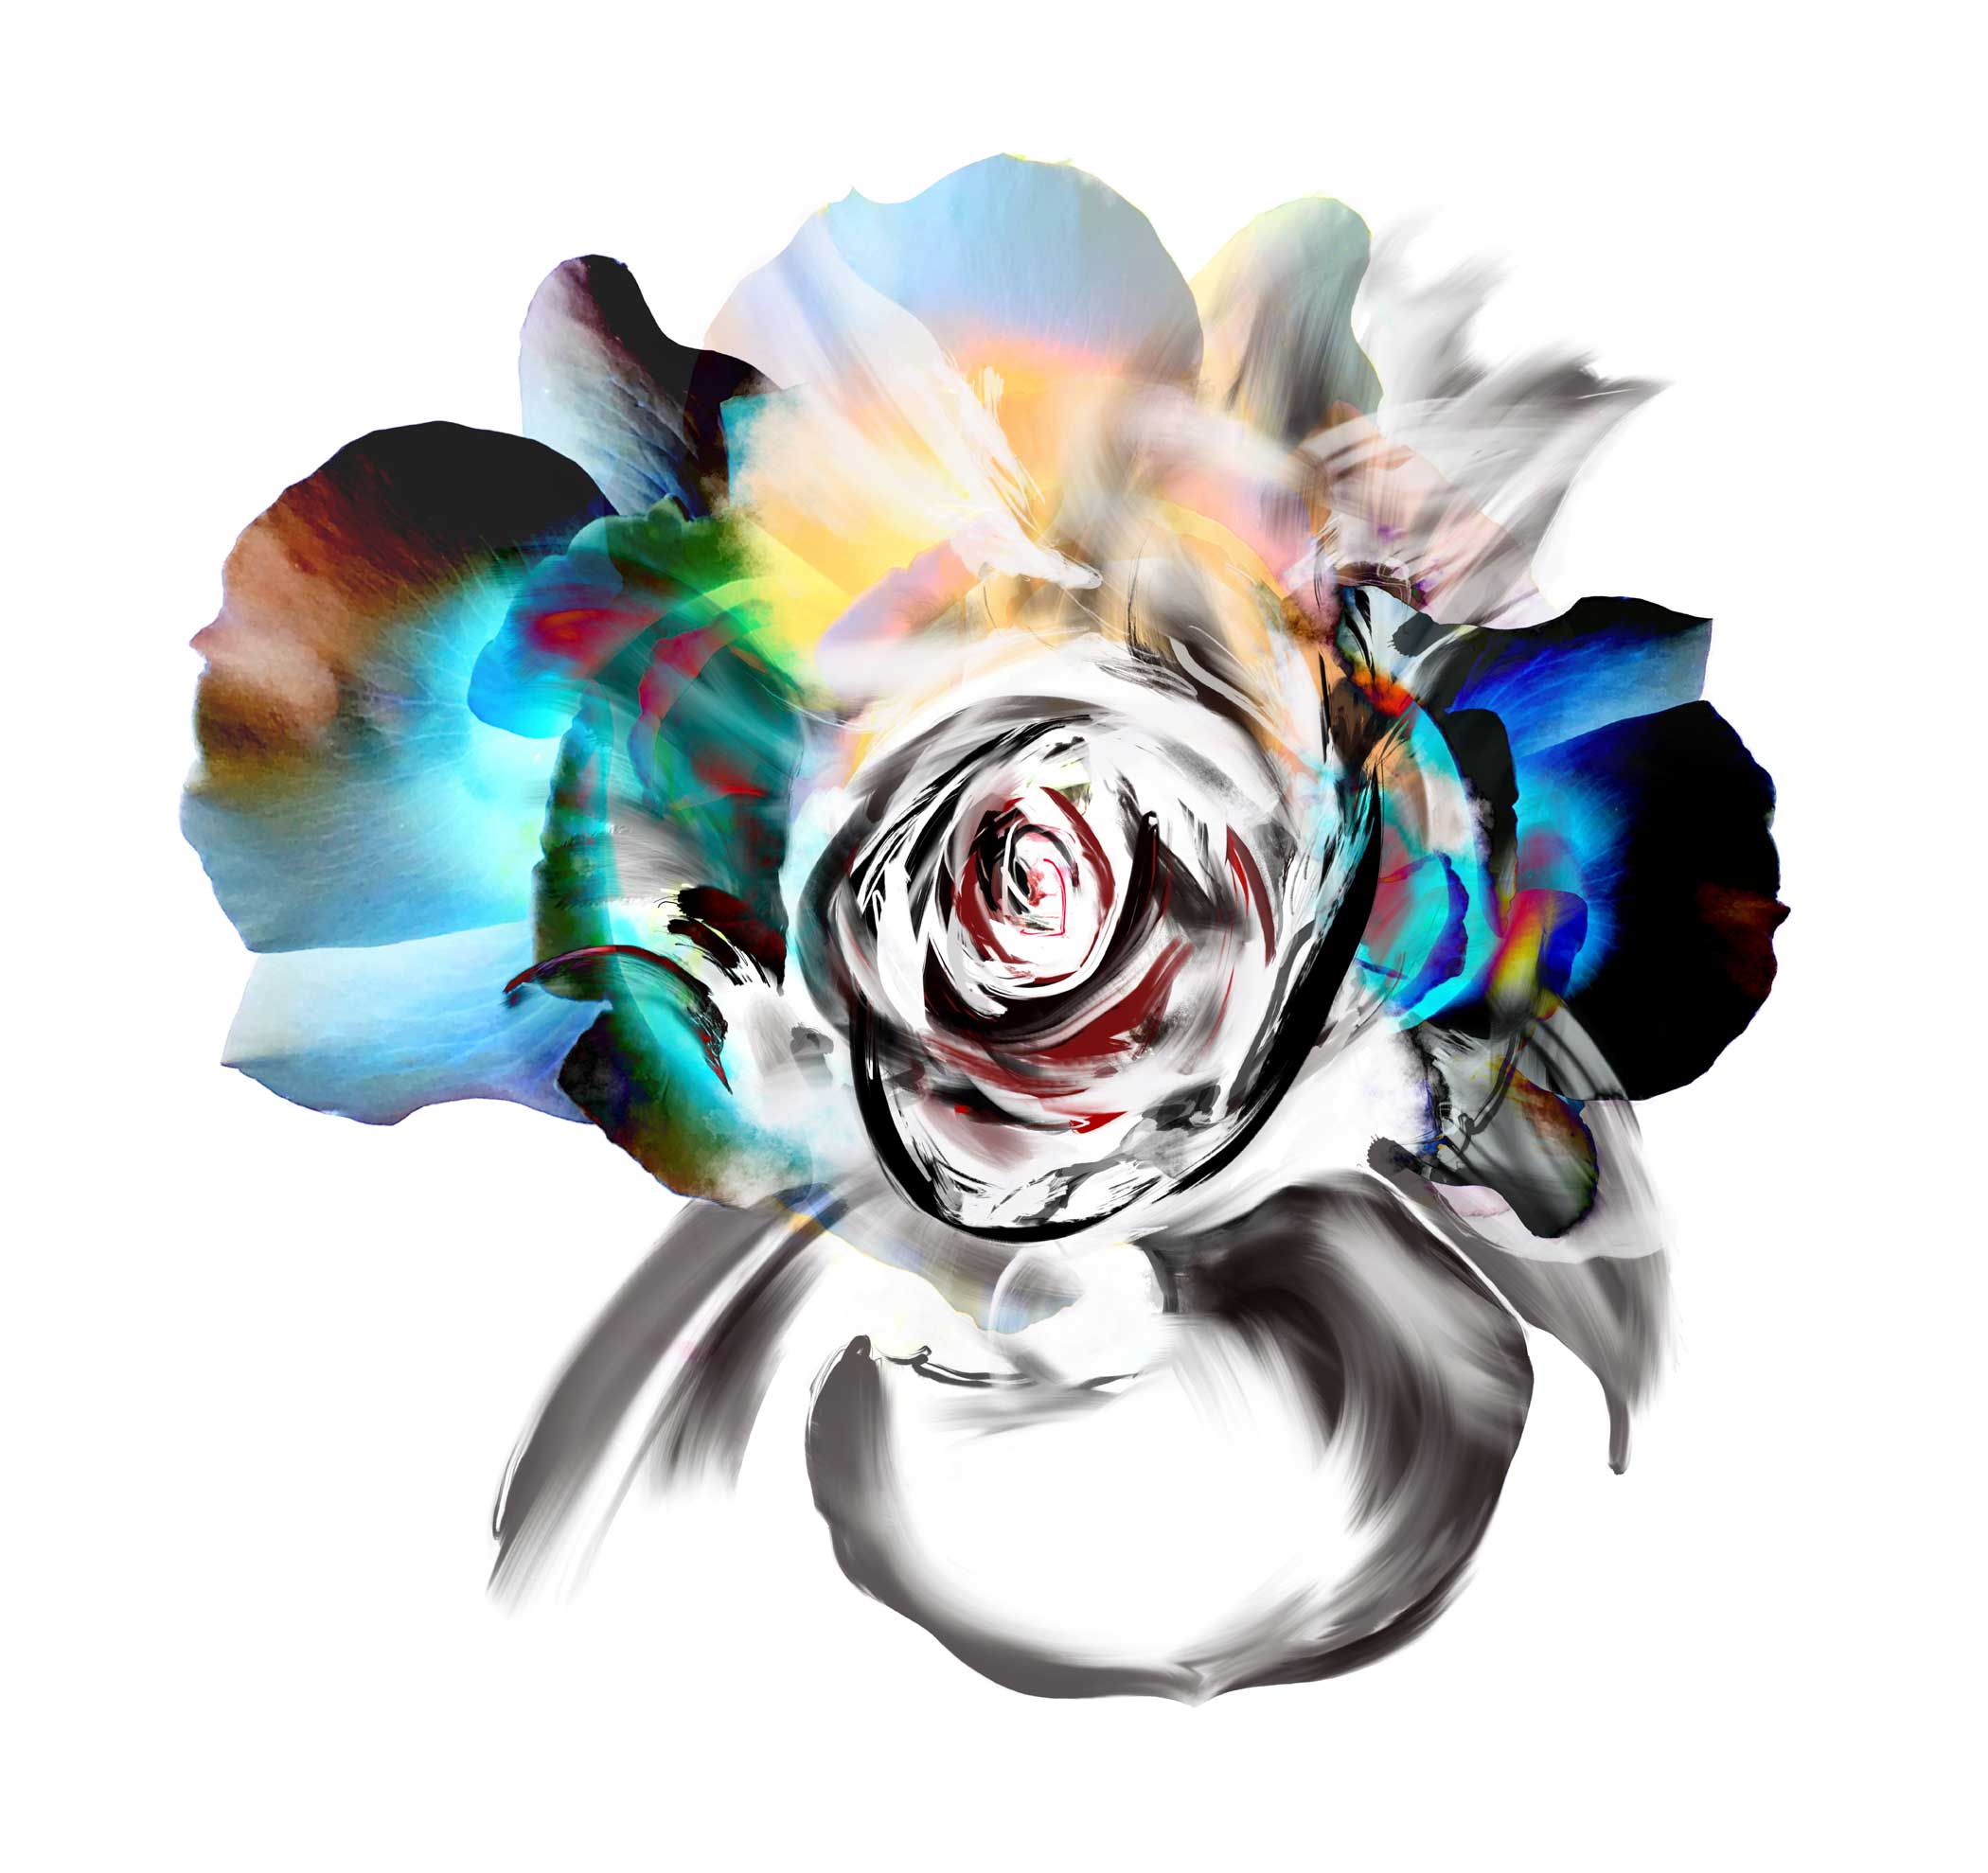 Kahori Maki sees energy in nature. To translate that concept into VISIONEO16, she starts by taking a photo of a rose with an iPhone 6s. Then she imports the image into the Procreate app on iPad Pro, where she gives the ﬂower new life by adding vivid colors and dynamic, free-flowing brushstrokes with Apple Pencil.